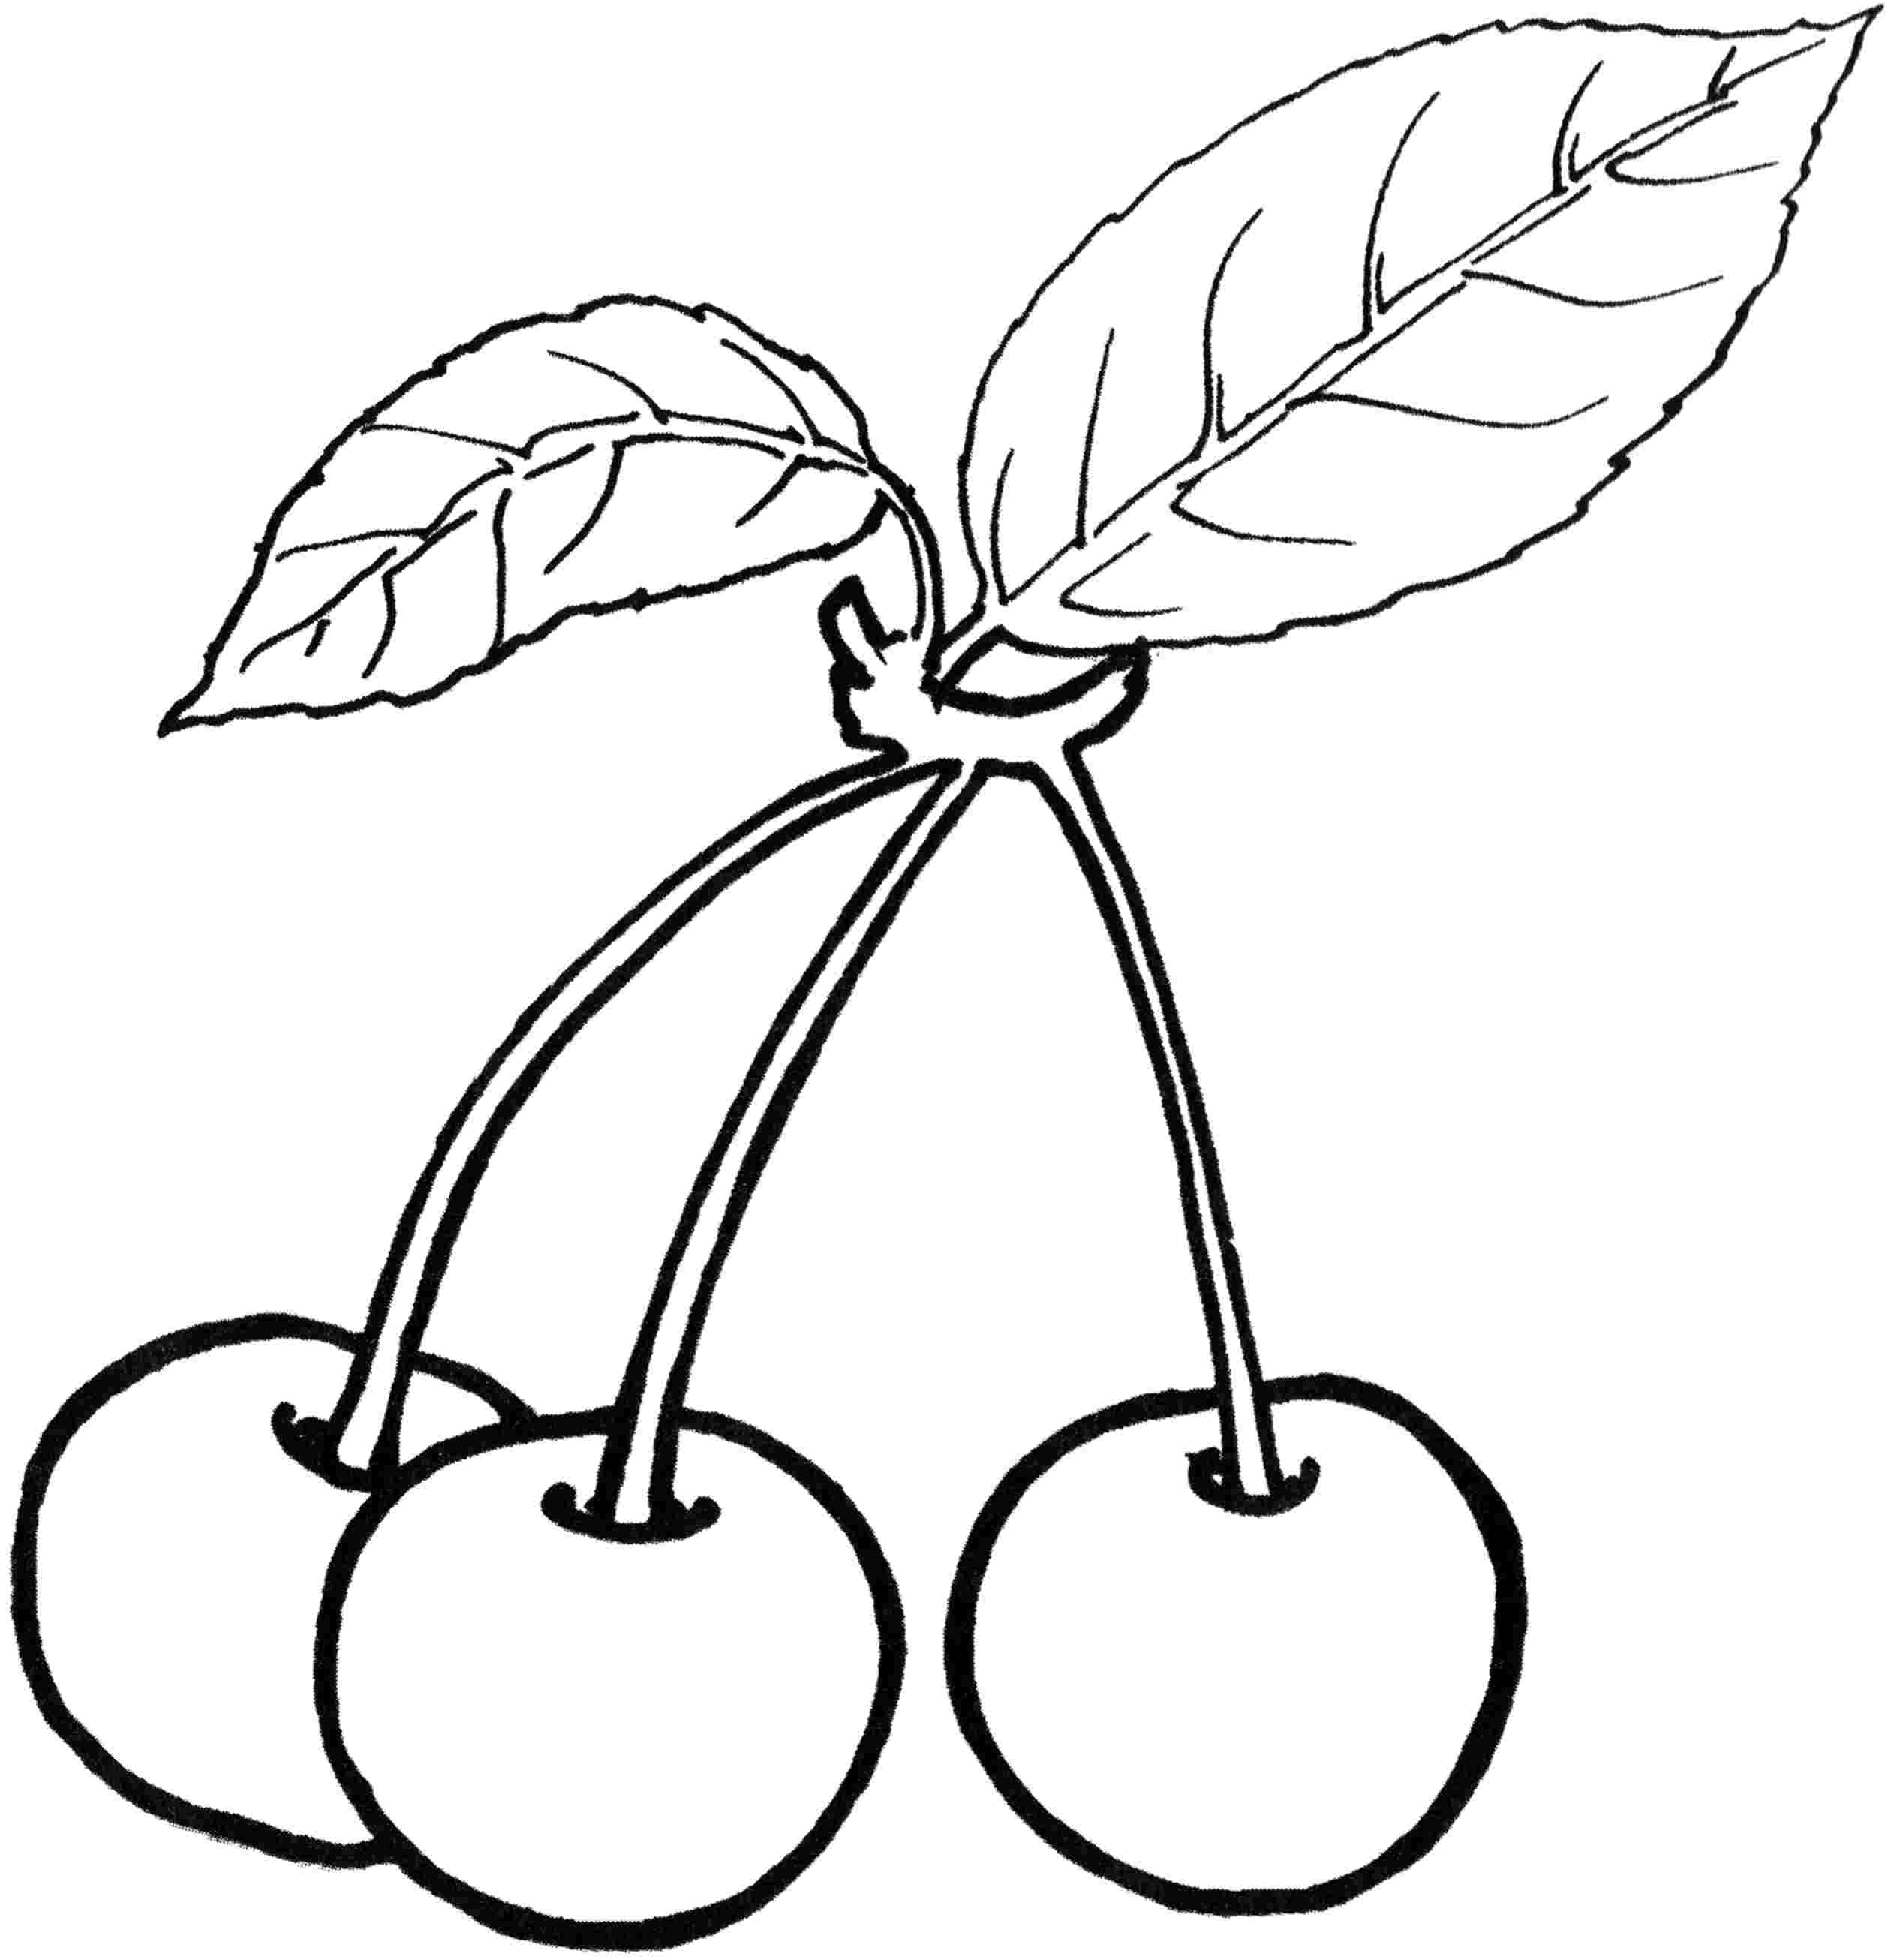 Fruit and berries coloring pages 4 - Free games for kidsFree games ...